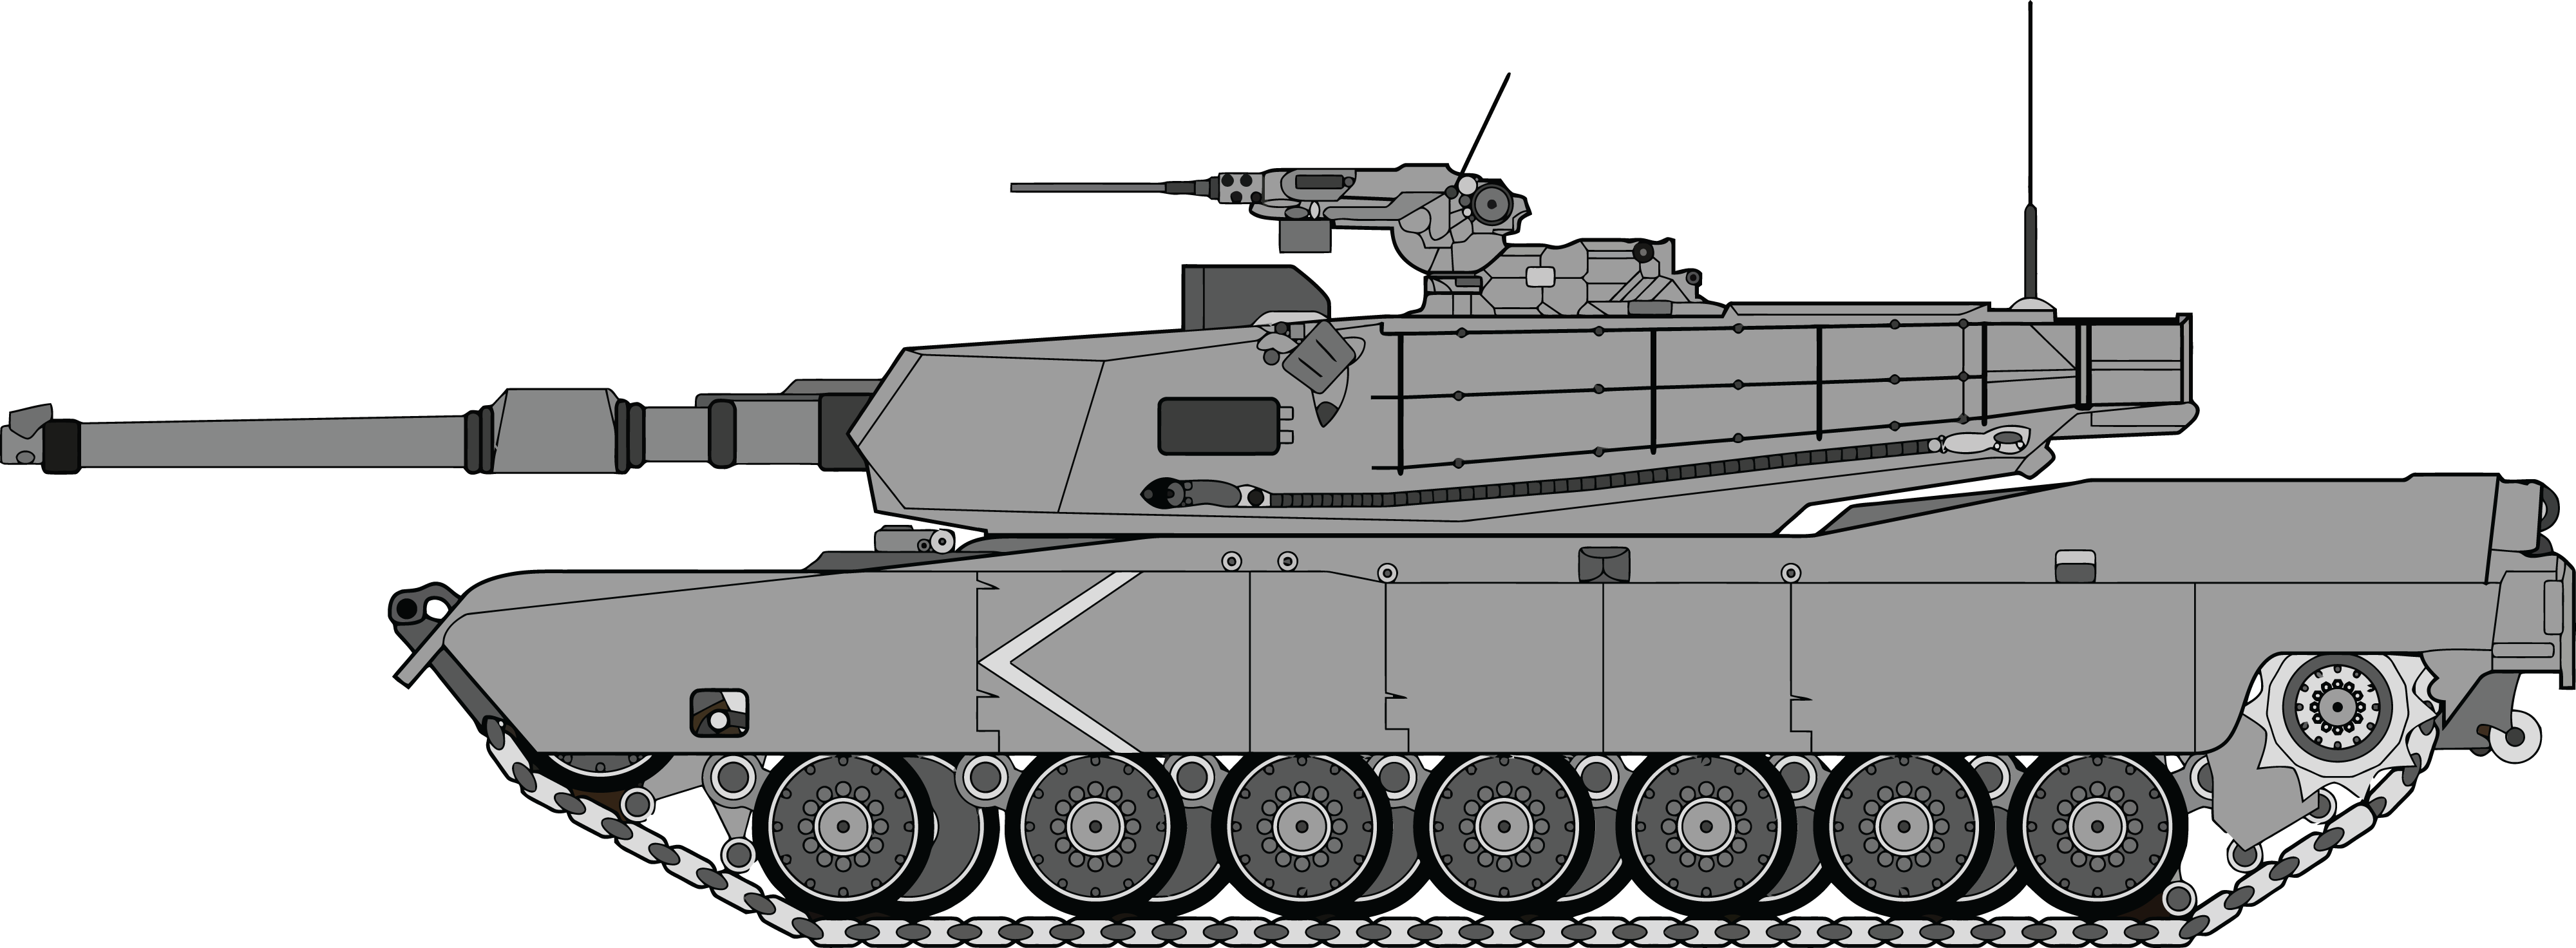 Free Clipart Of An army tank #00011048 .